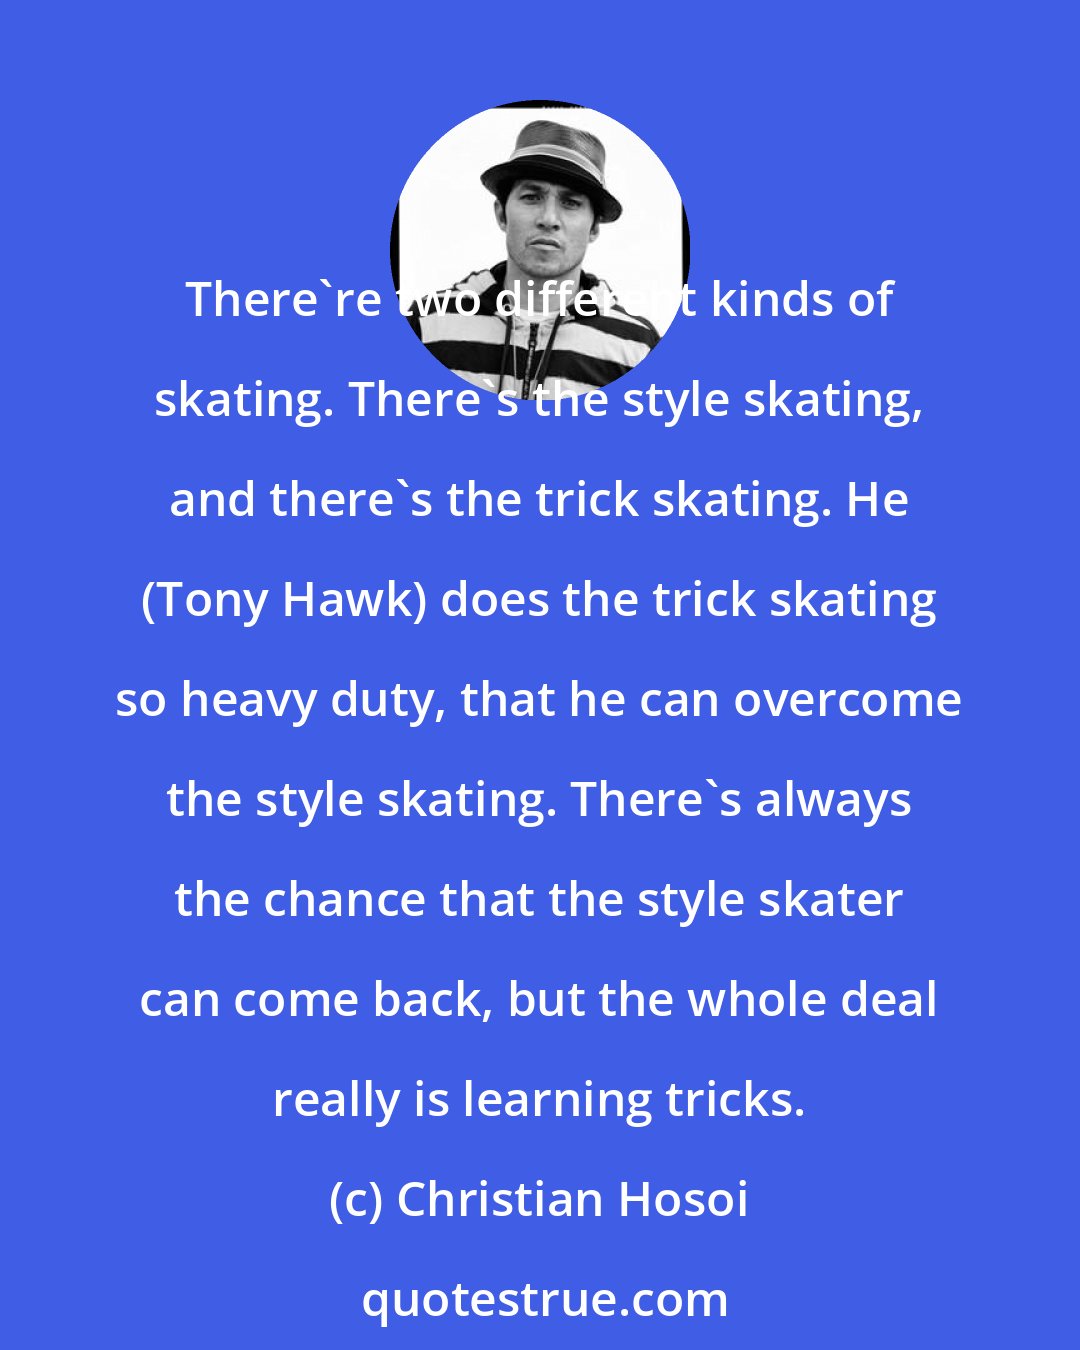 Christian Hosoi: There're two different kinds of skating. There's the style skating, and there's the trick skating. He (Tony Hawk) does the trick skating so heavy duty, that he can overcome the style skating. There's always the chance that the style skater can come back, but the whole deal really is learning tricks.